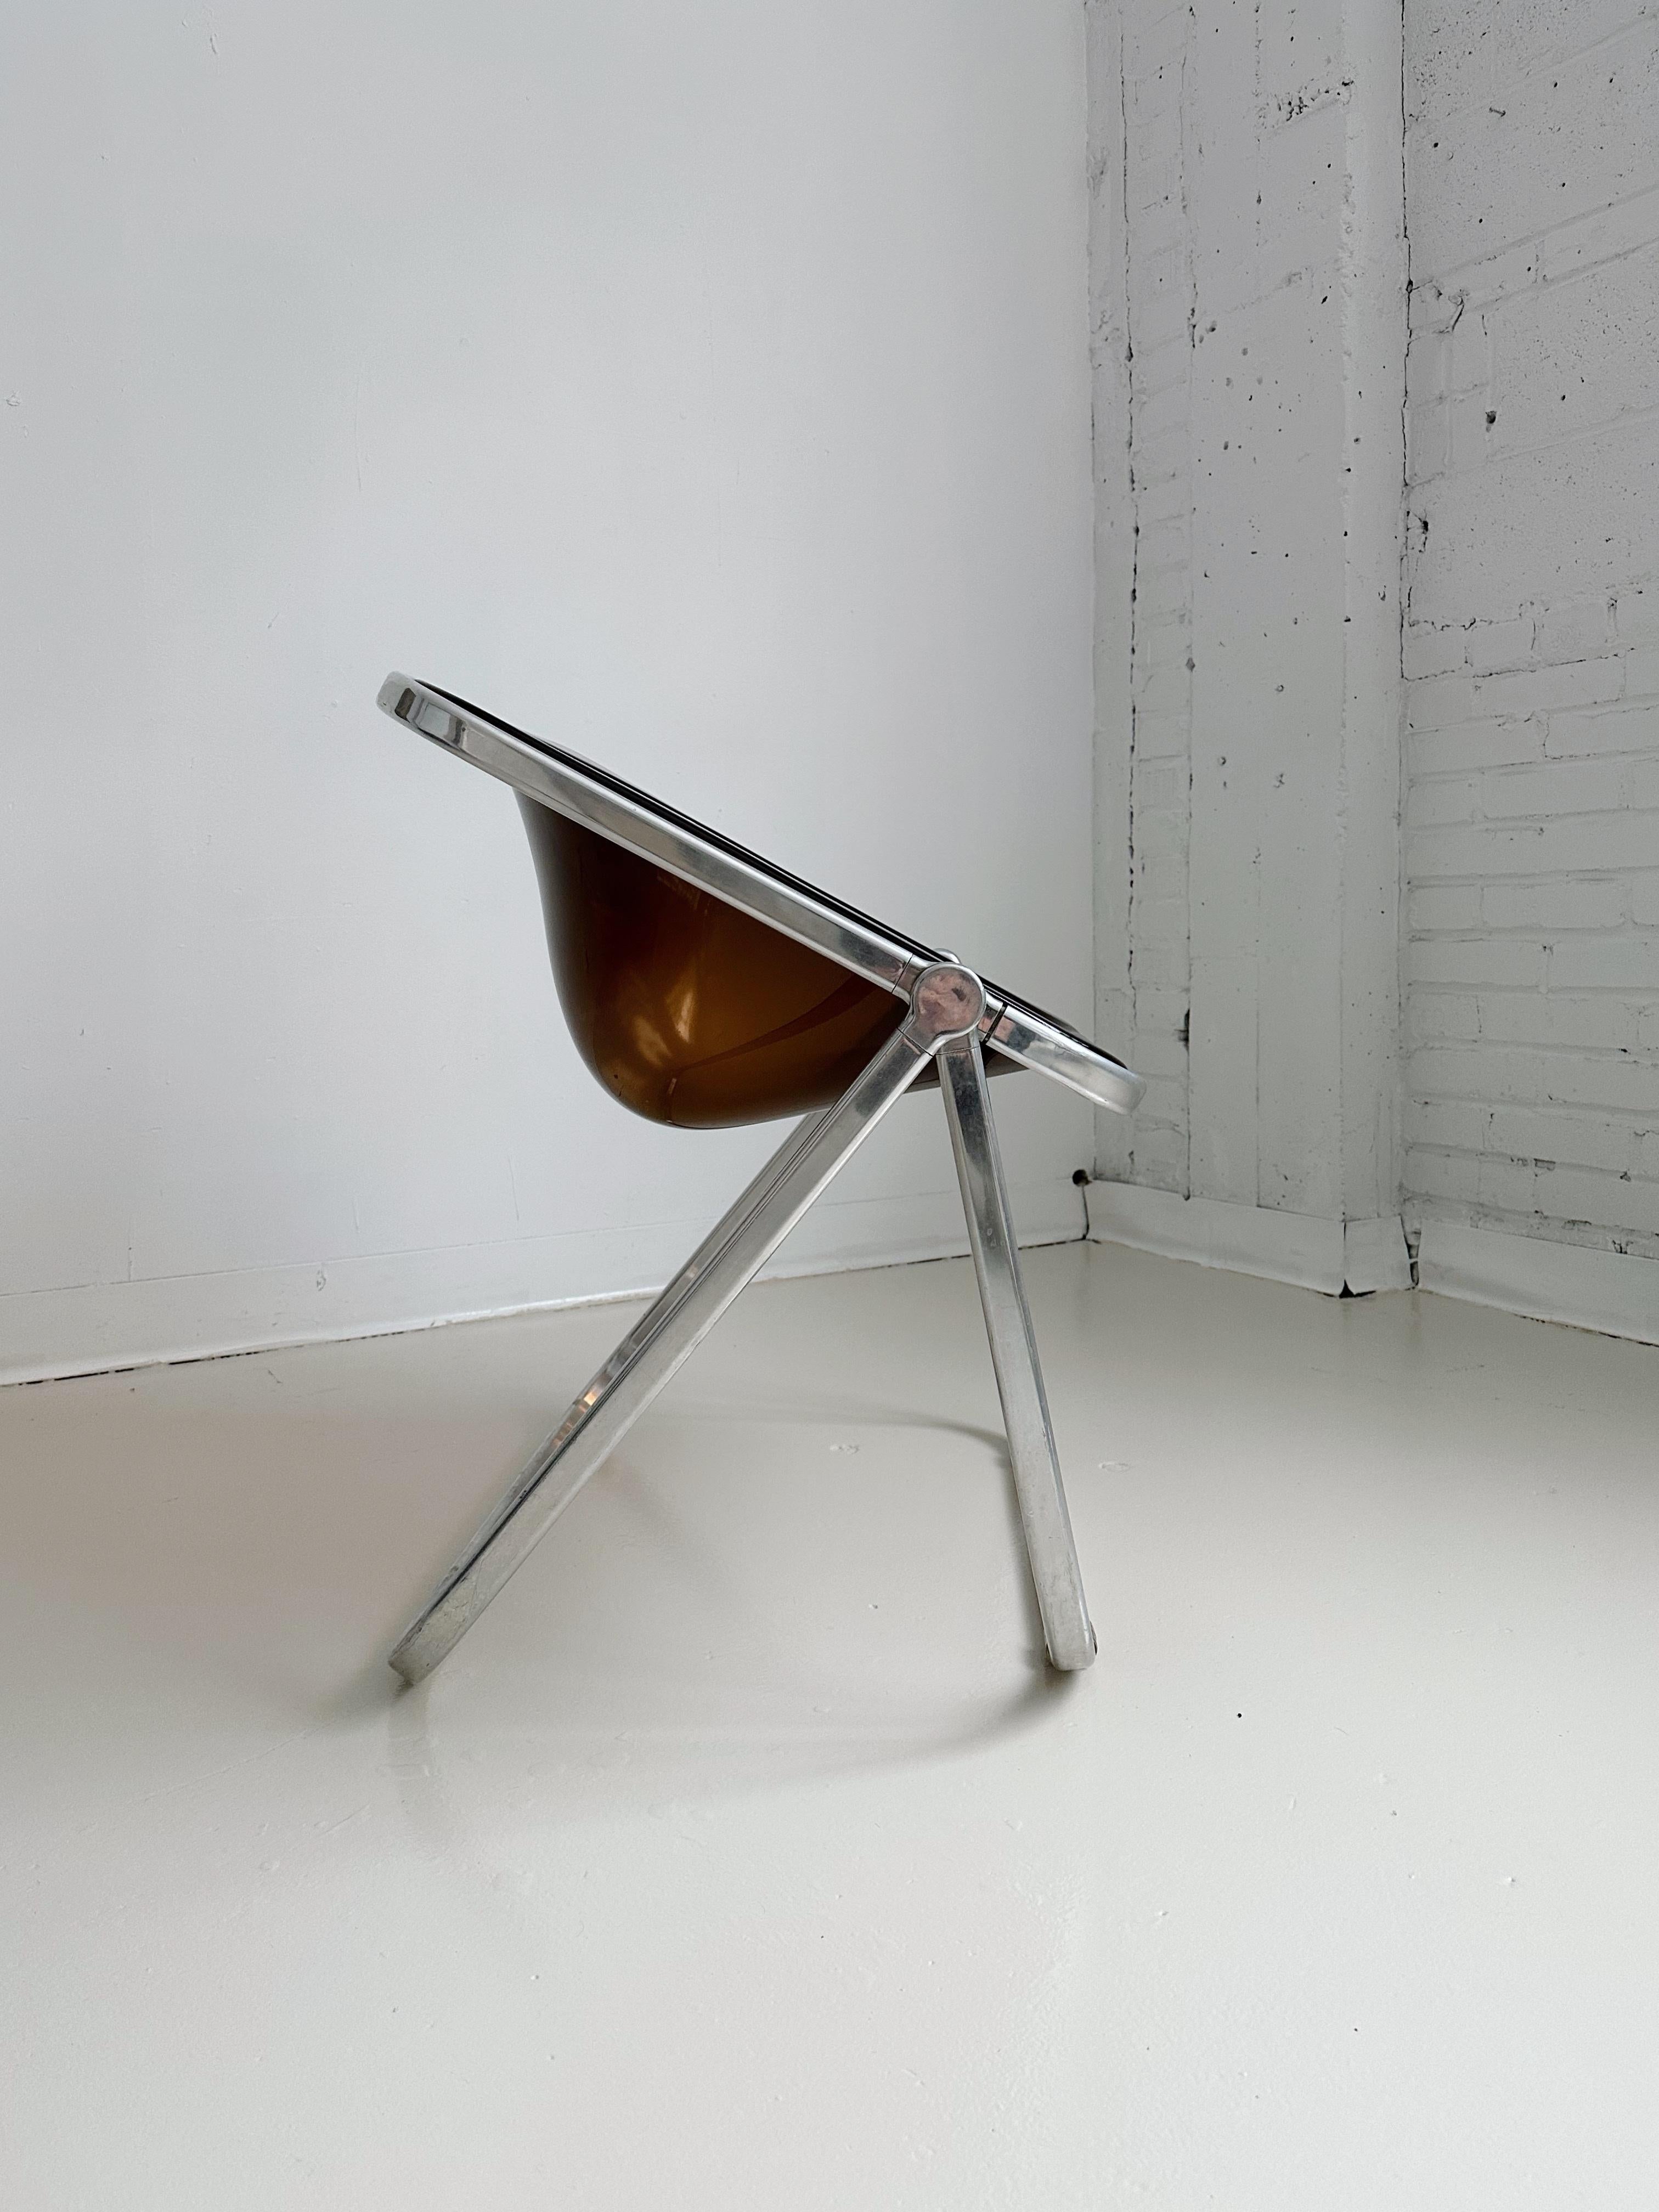 Smoked Acrylic Folding Plona Chair by Giancarlo Piretti for Castelli, 70's
This design is in the permanent collection of the MoMA.

Folded size: 28”W x 10”D x 43”H? 

Very good condition, only a couple of minor scratches on the acrylic seat